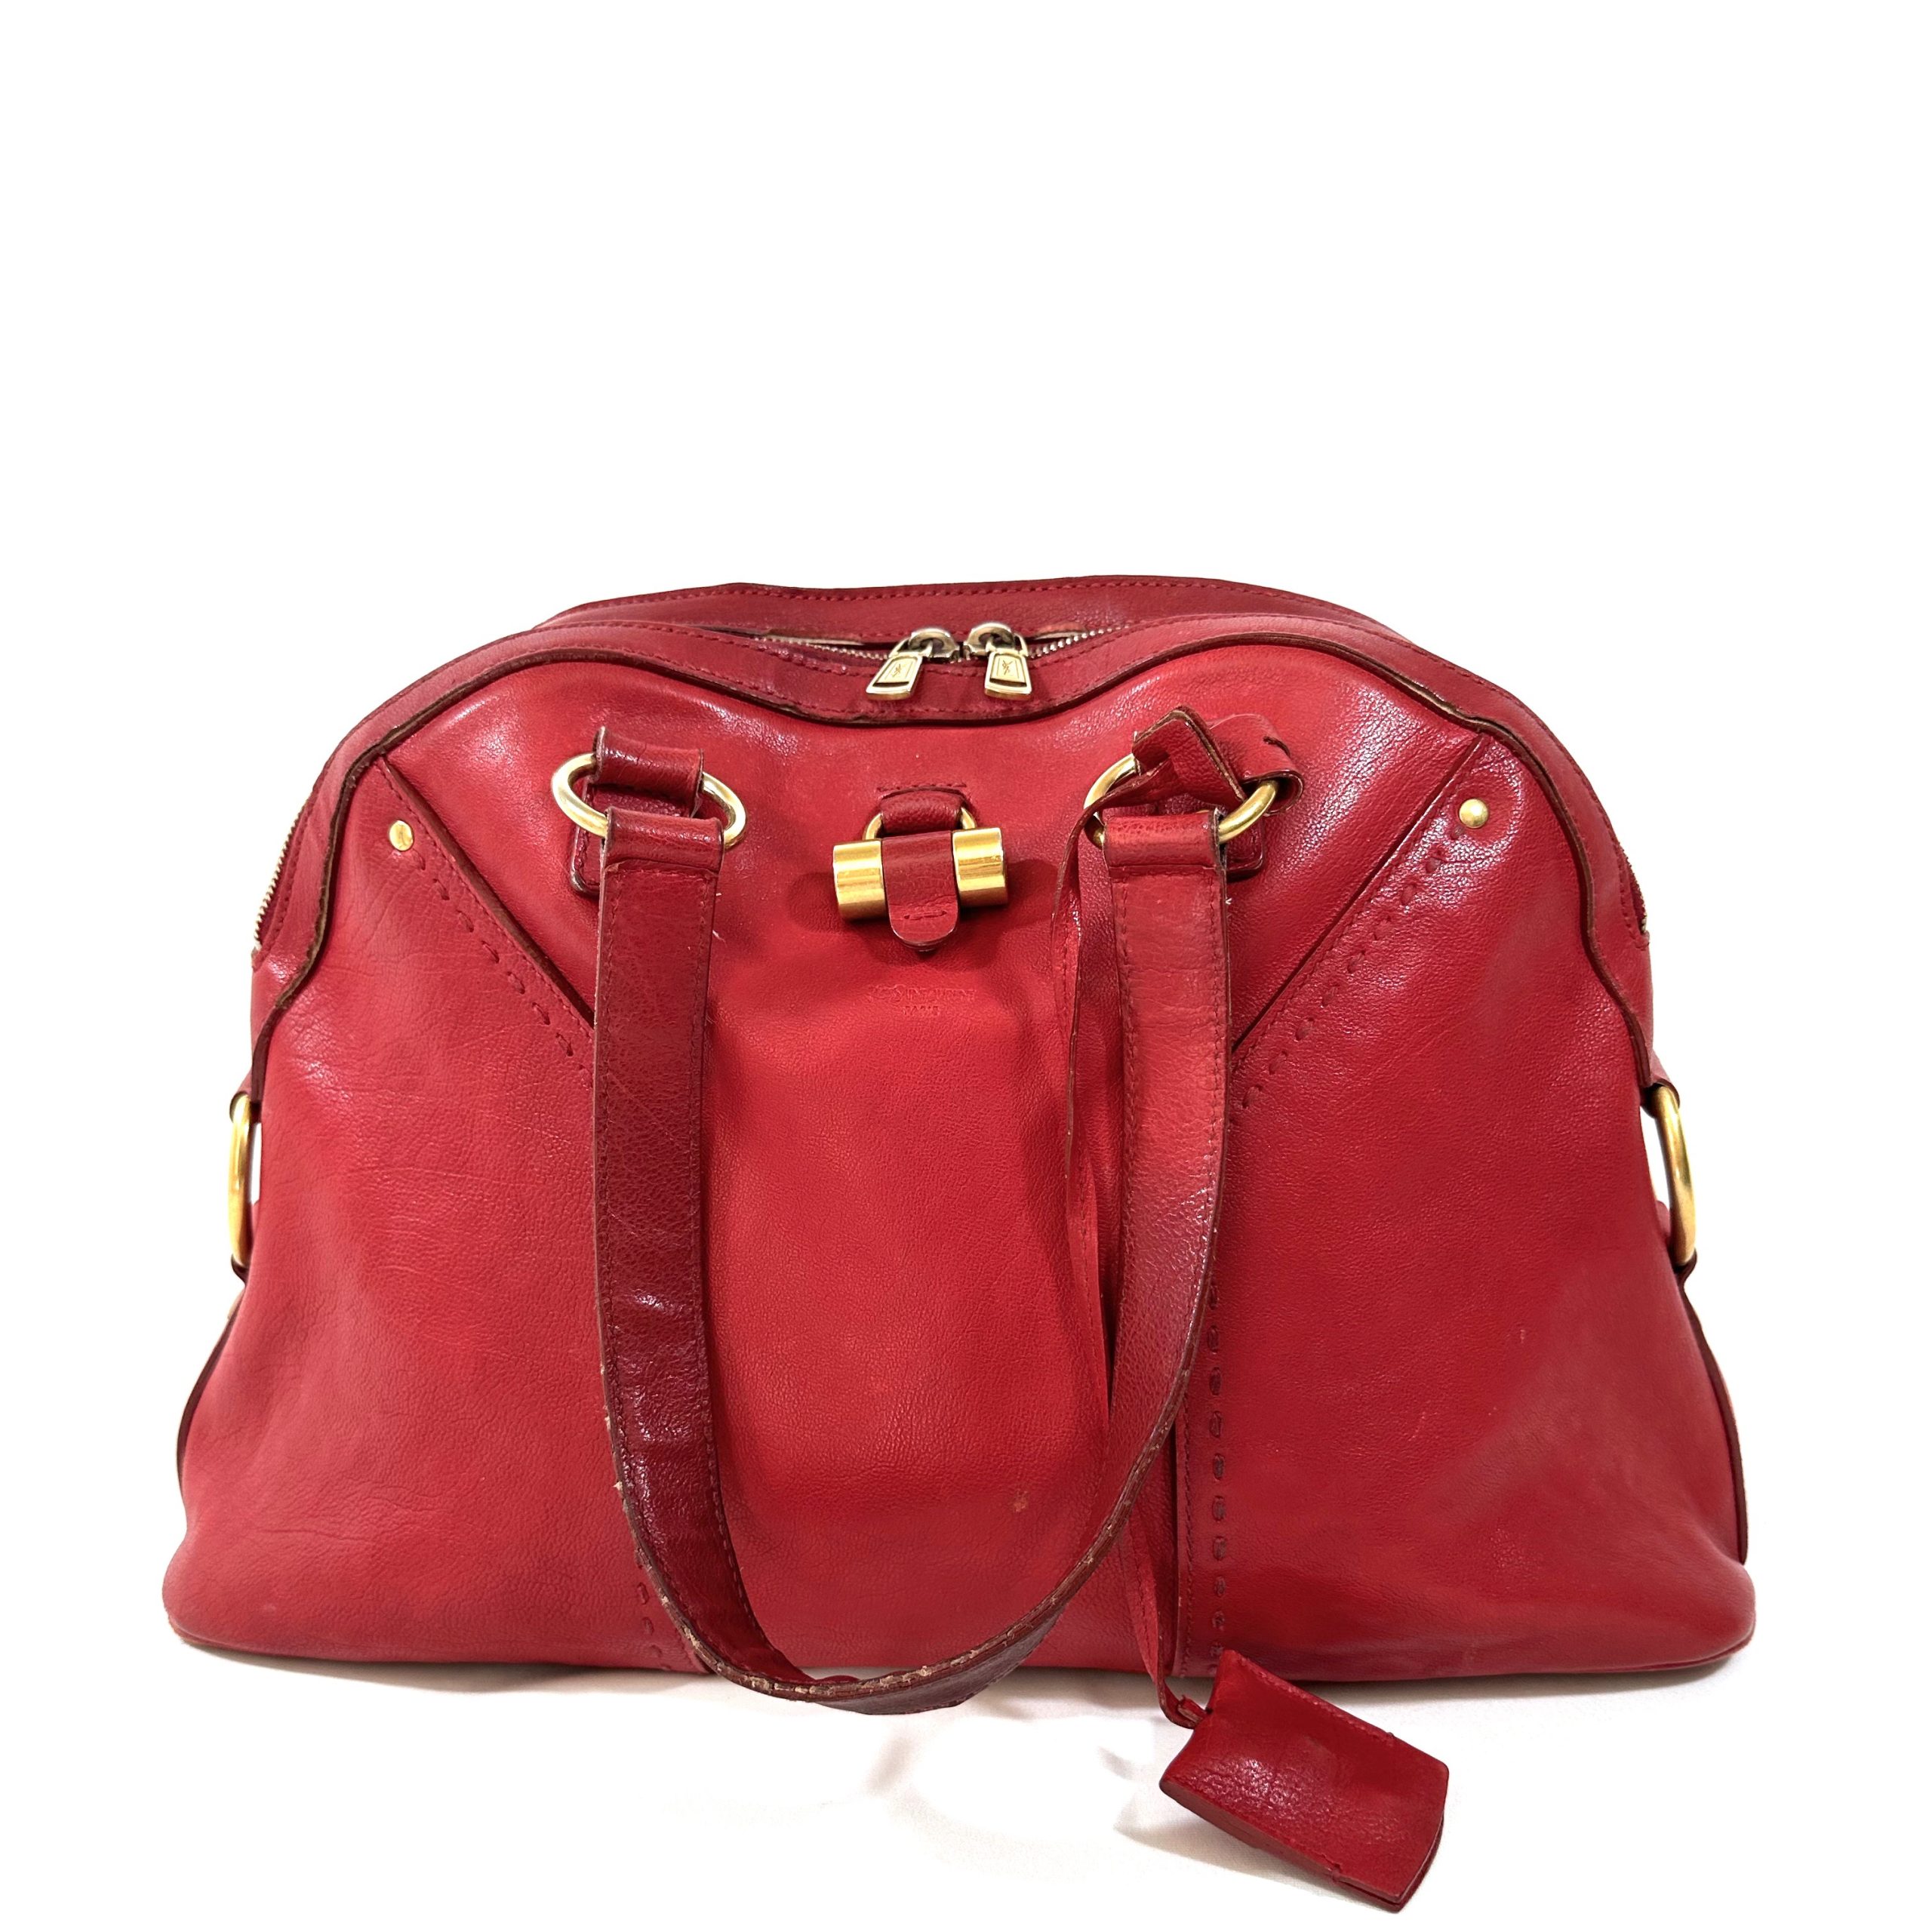 SAINT LAURENT RED LEATHER MUSE BAG - Still in fashion